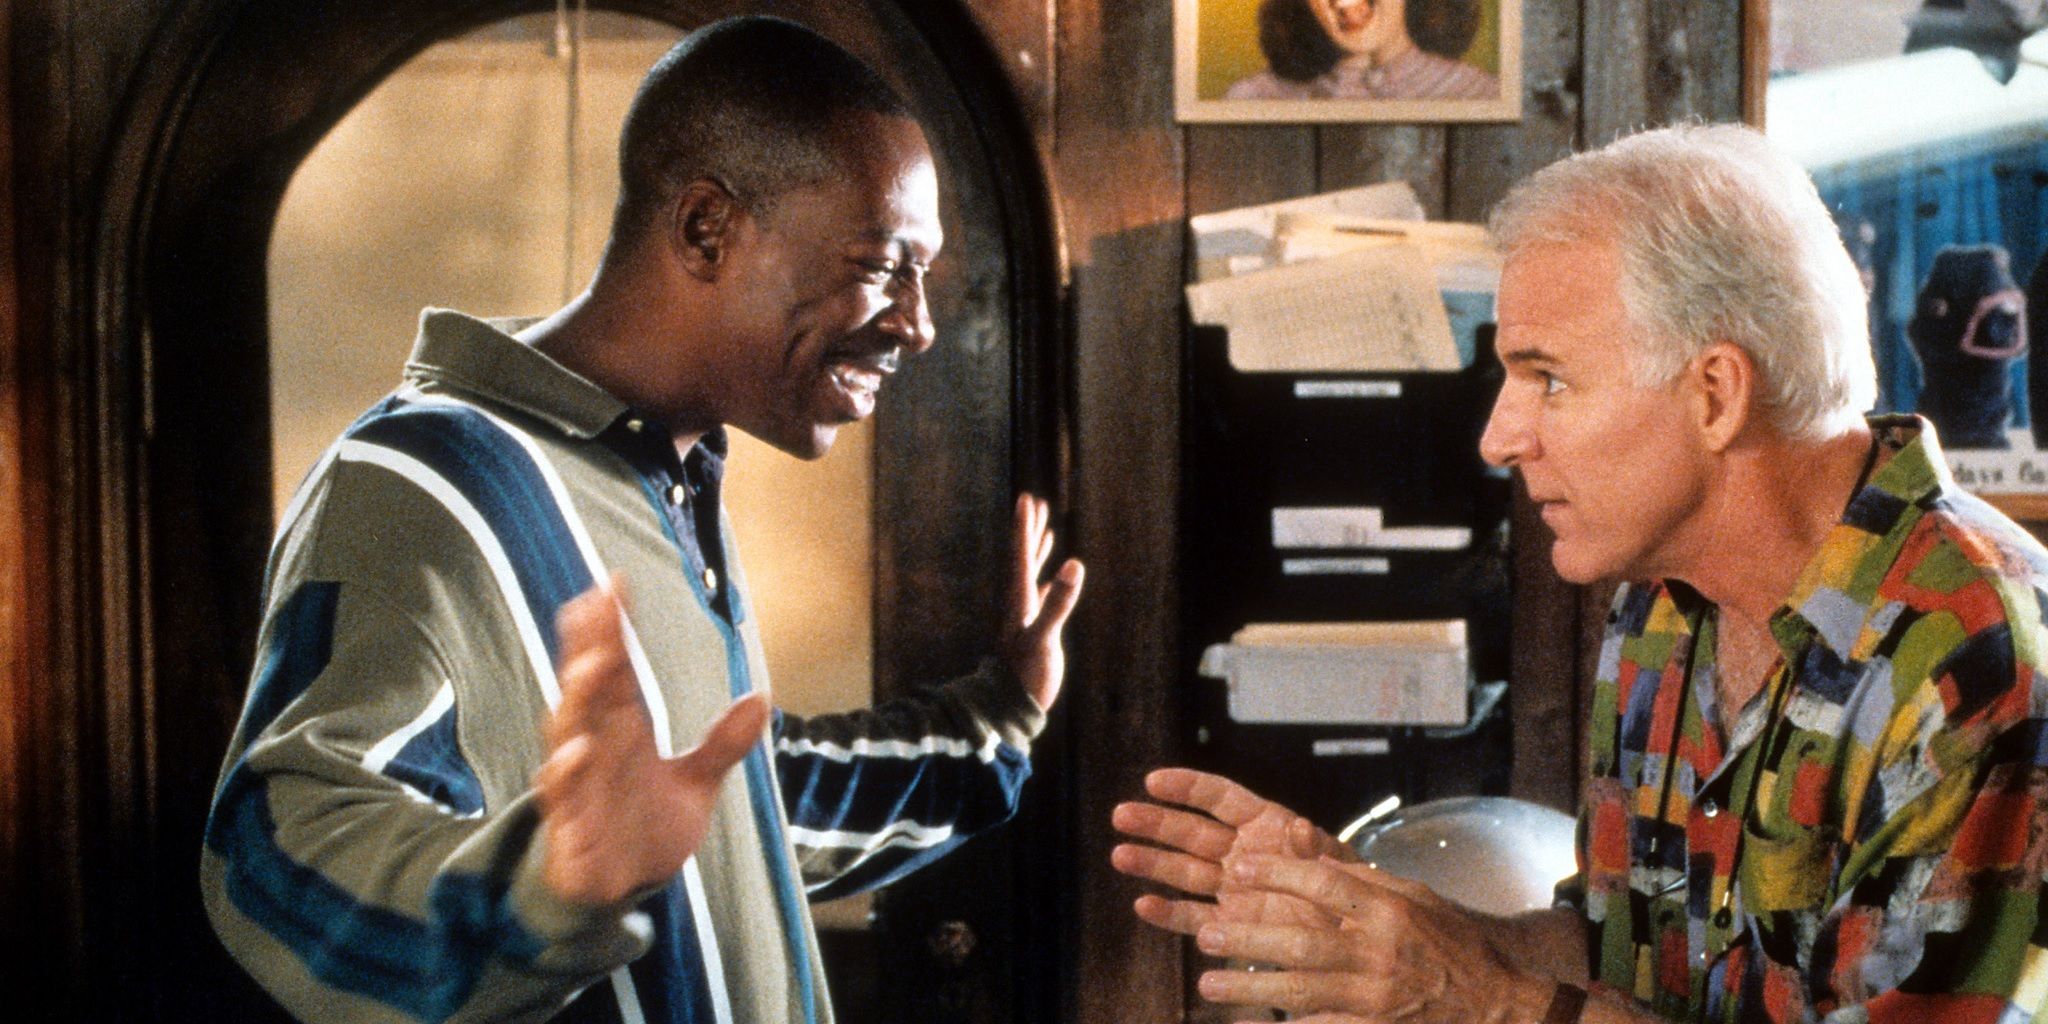 Bobby directing Jiff in Bowfinger